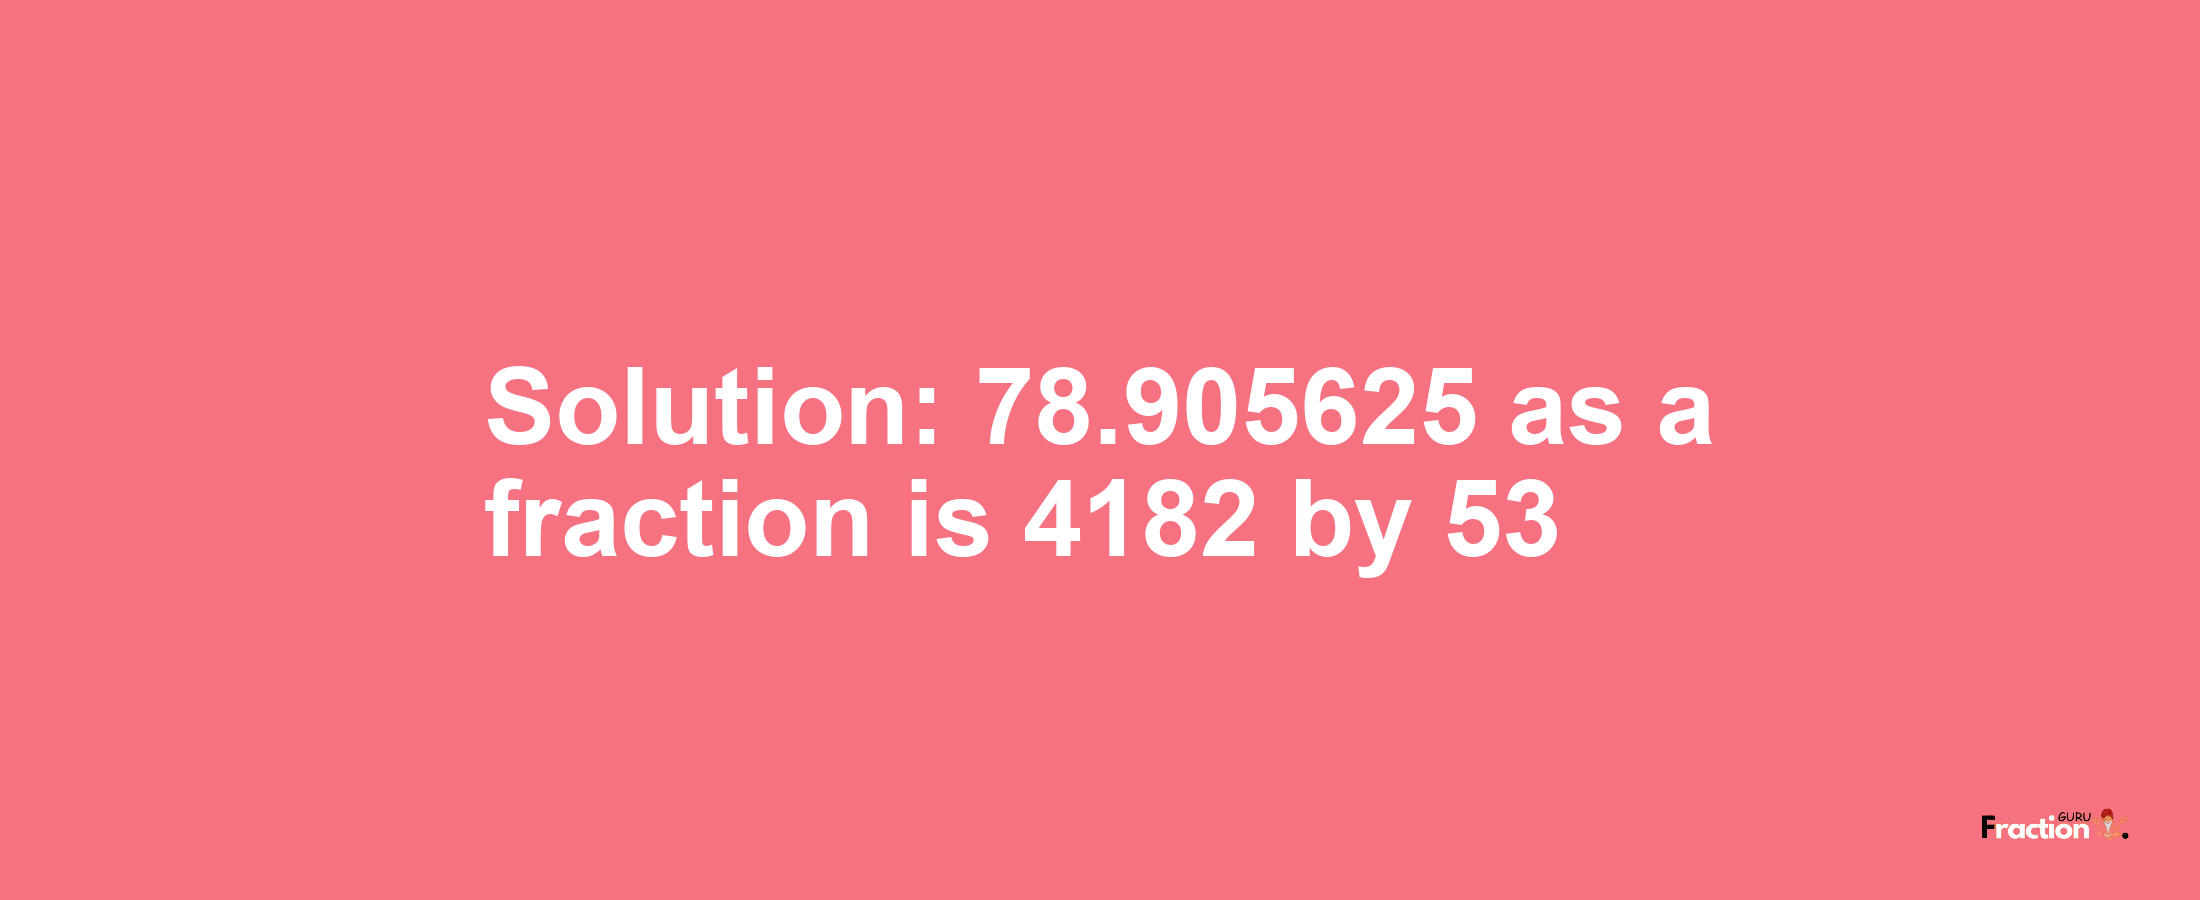 Solution:78.905625 as a fraction is 4182/53